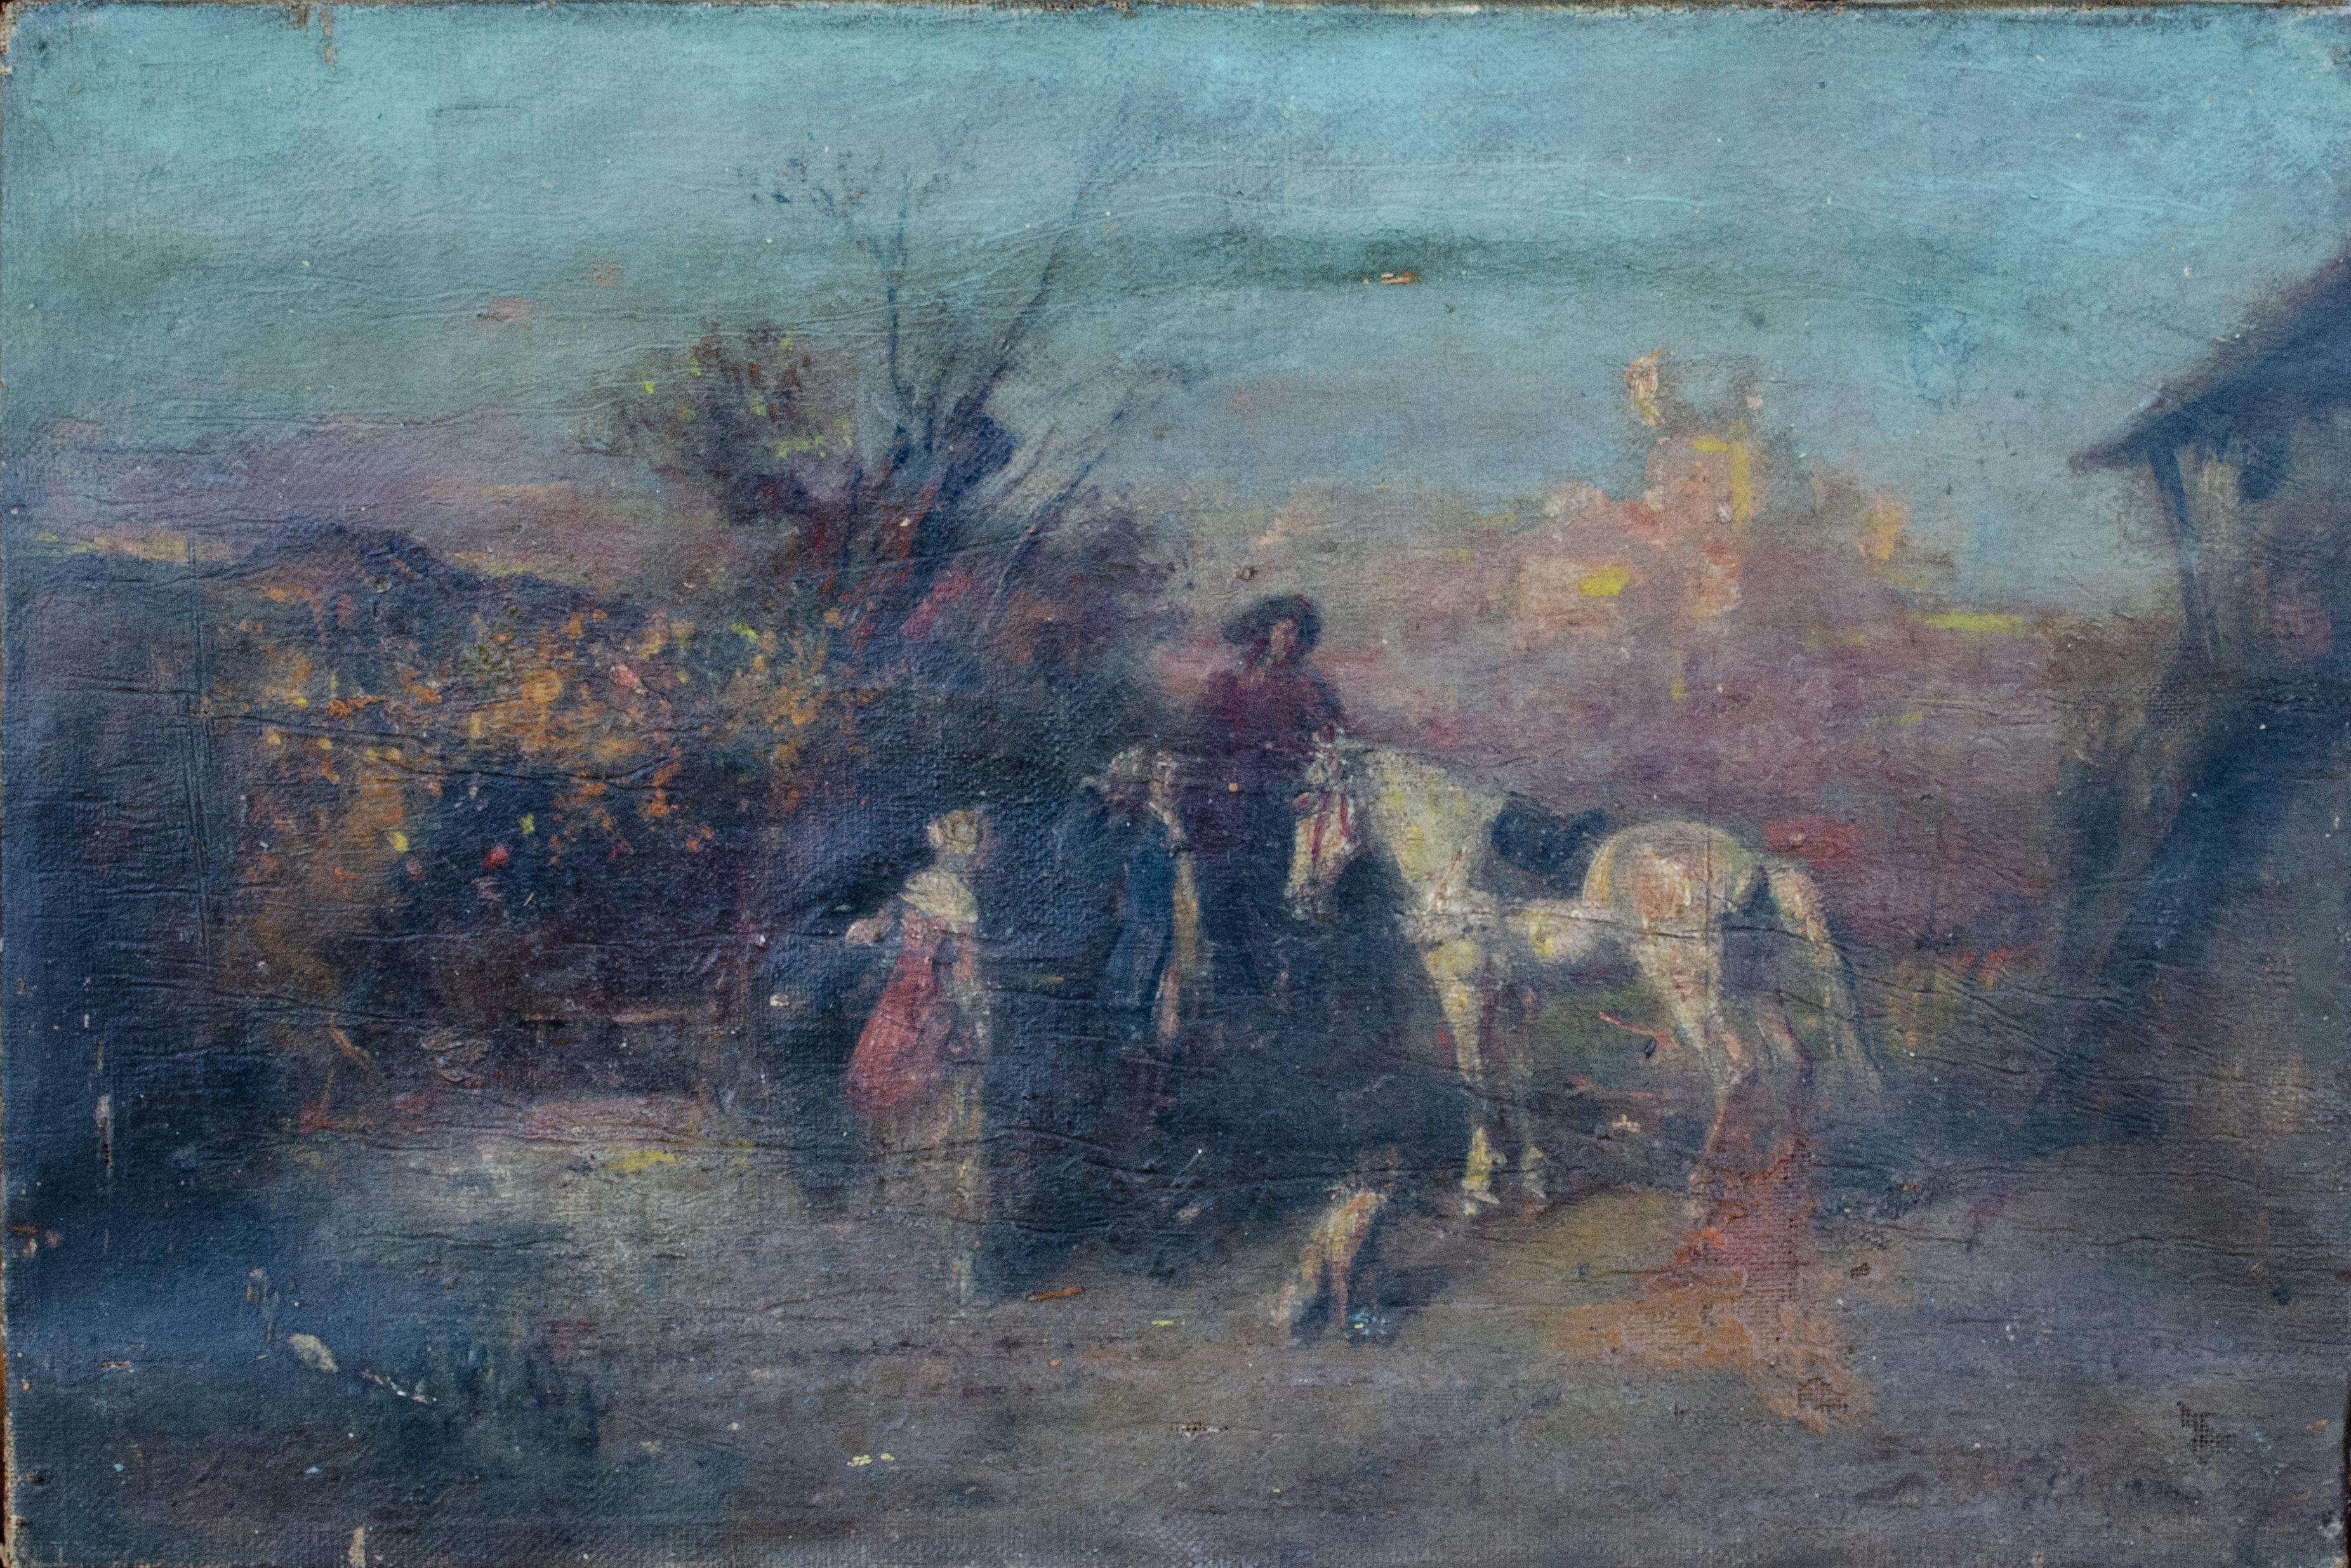 Unknown Figurative Painting - 19th Century Spanish Impressionist Painting